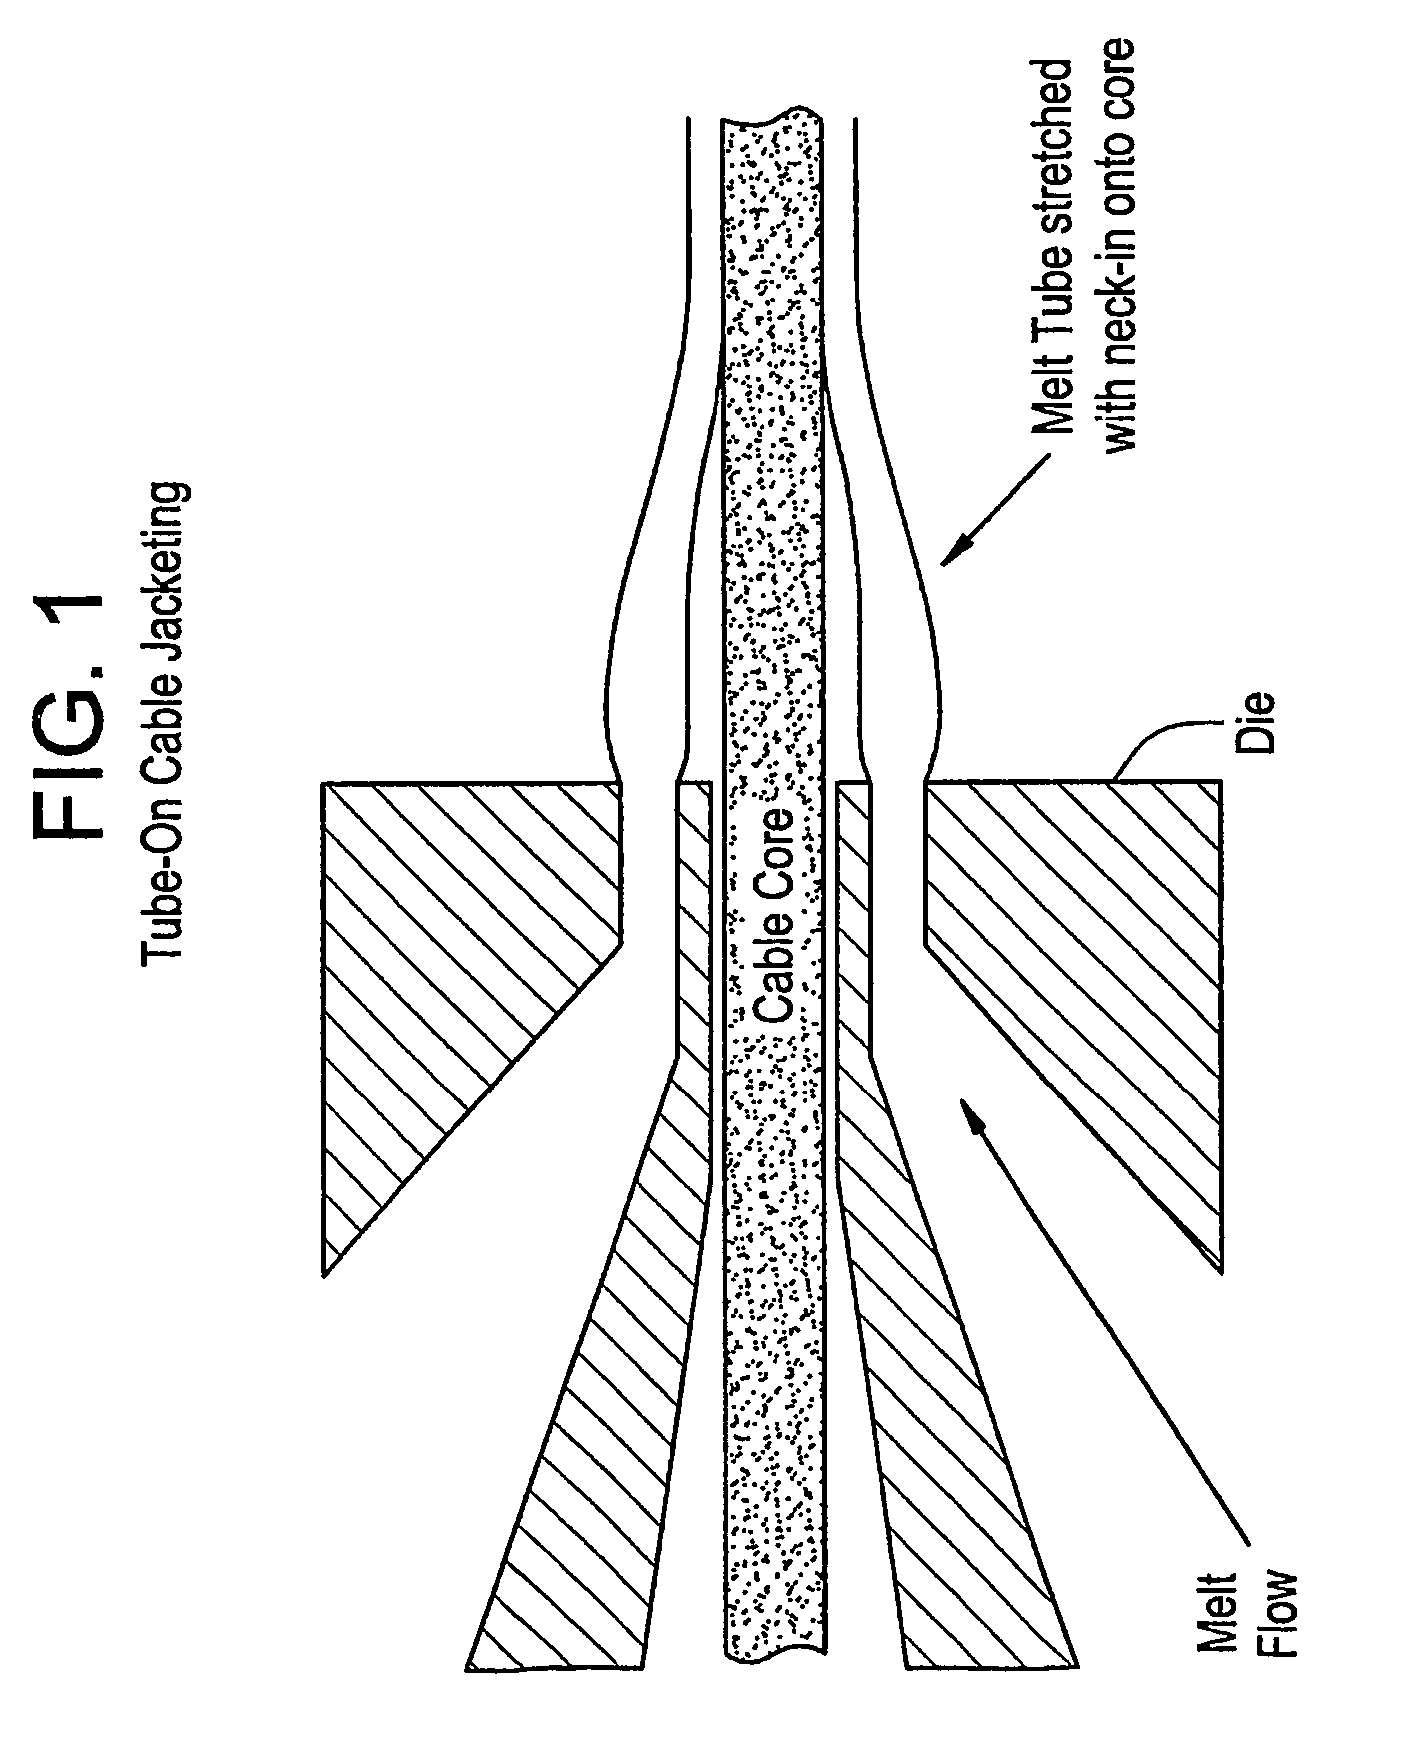 Polypropylene cable jacket compositions with enhanced melt strength and physical properties